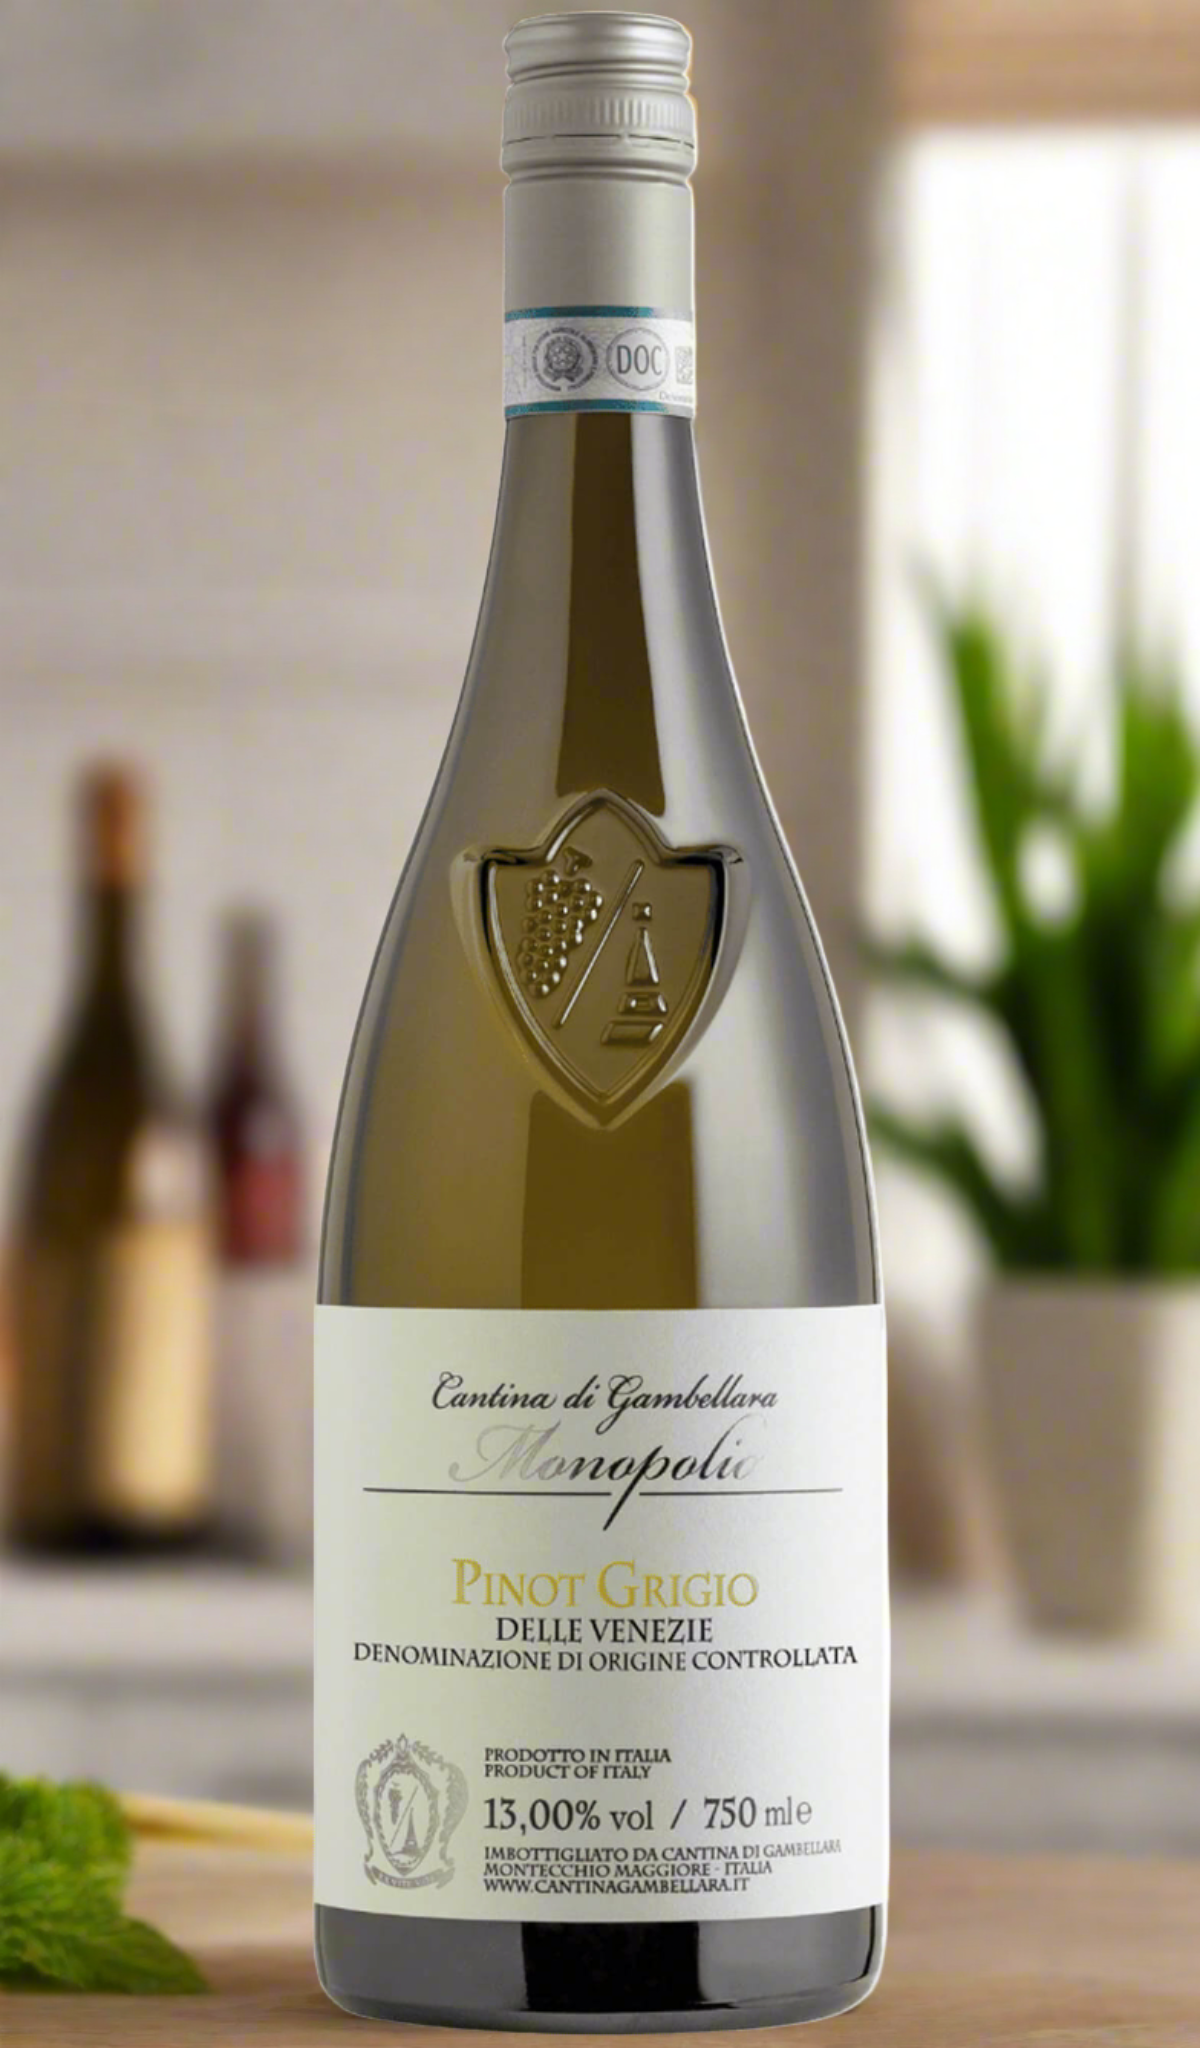 Find out more, explore the range and purchase Cantina di Gambellara Monopolio Pinot Grigio 2023 (Italy) available online at Wine Sellers Direct - Australia's independent liquor specialists.